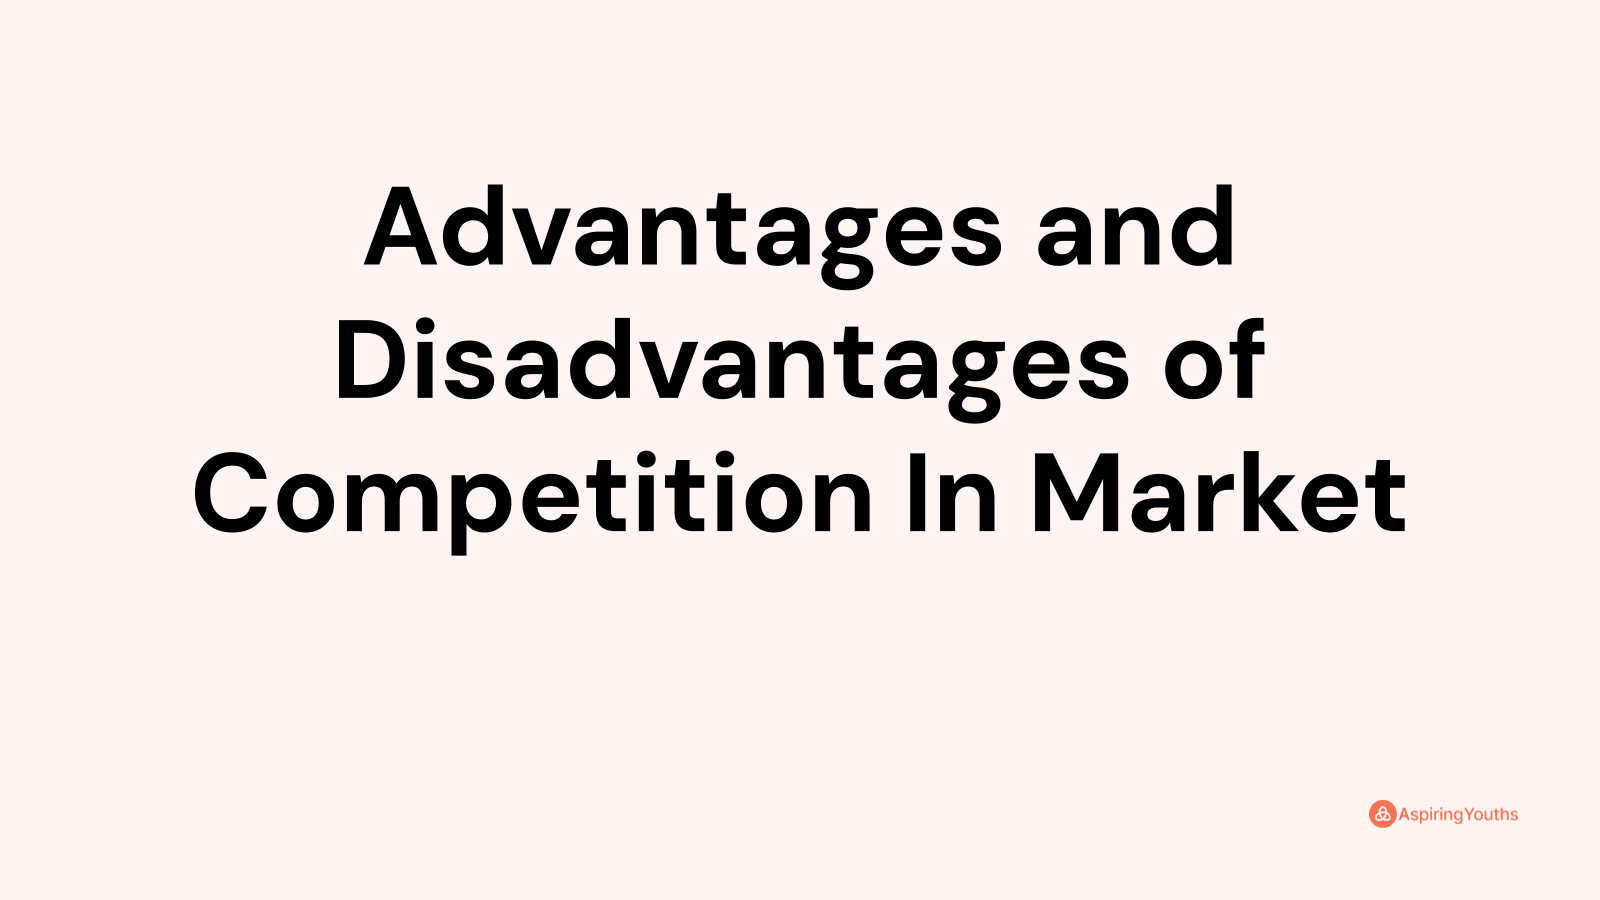 Advantages and disadvantages of Competition In Market